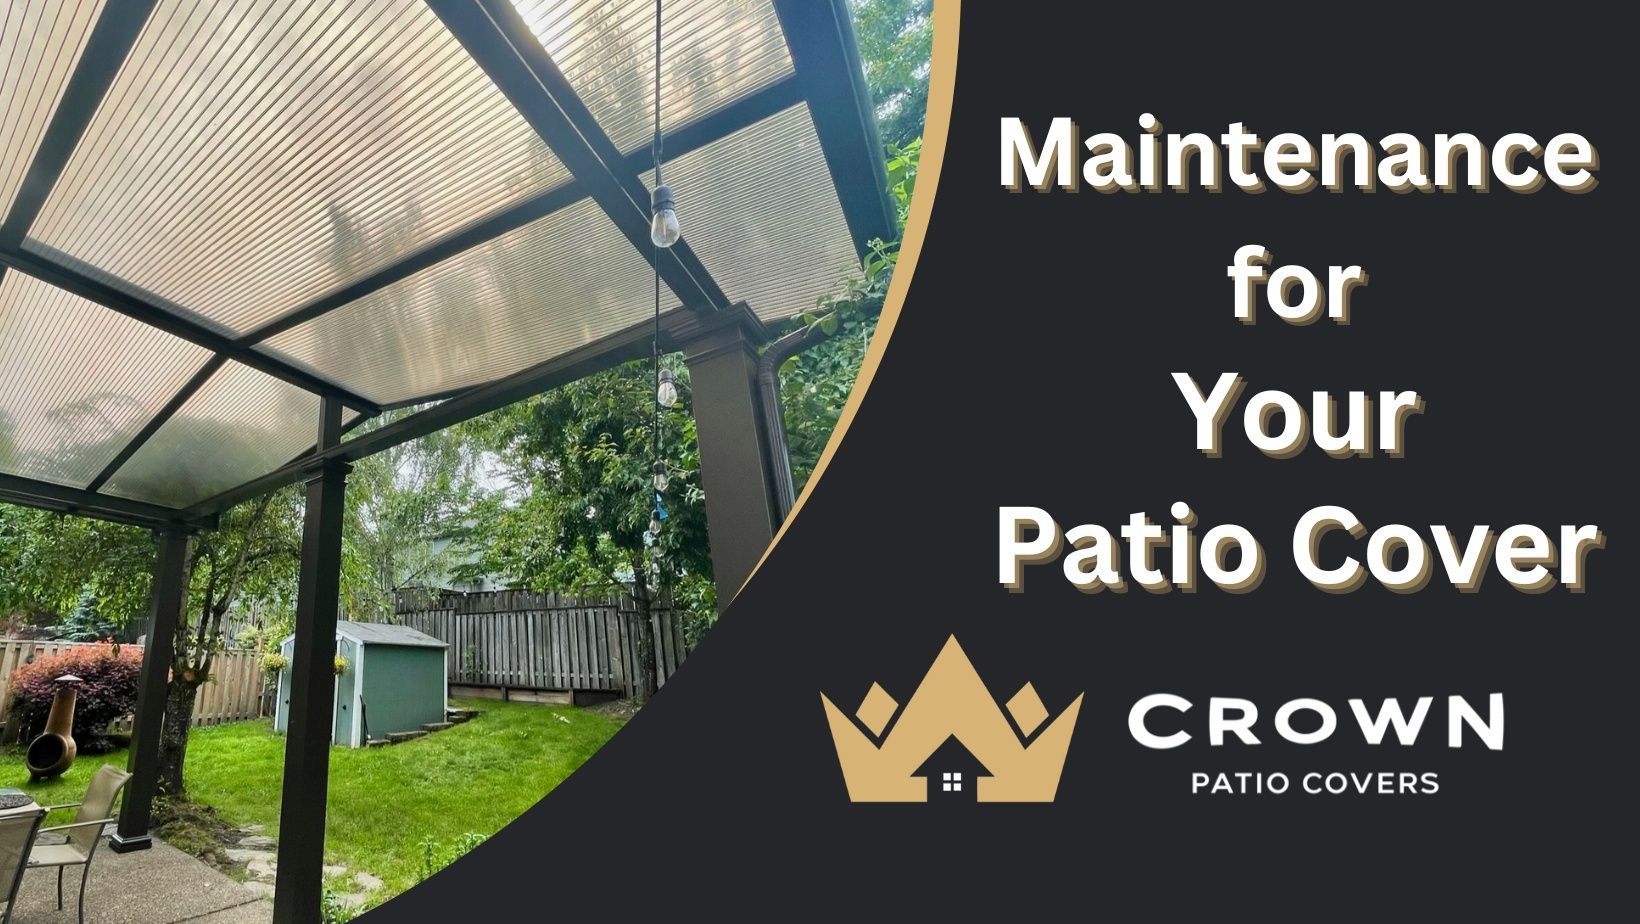 Portland Patio Cover Contractor on the Importance of Maintenance of Patio Covers.